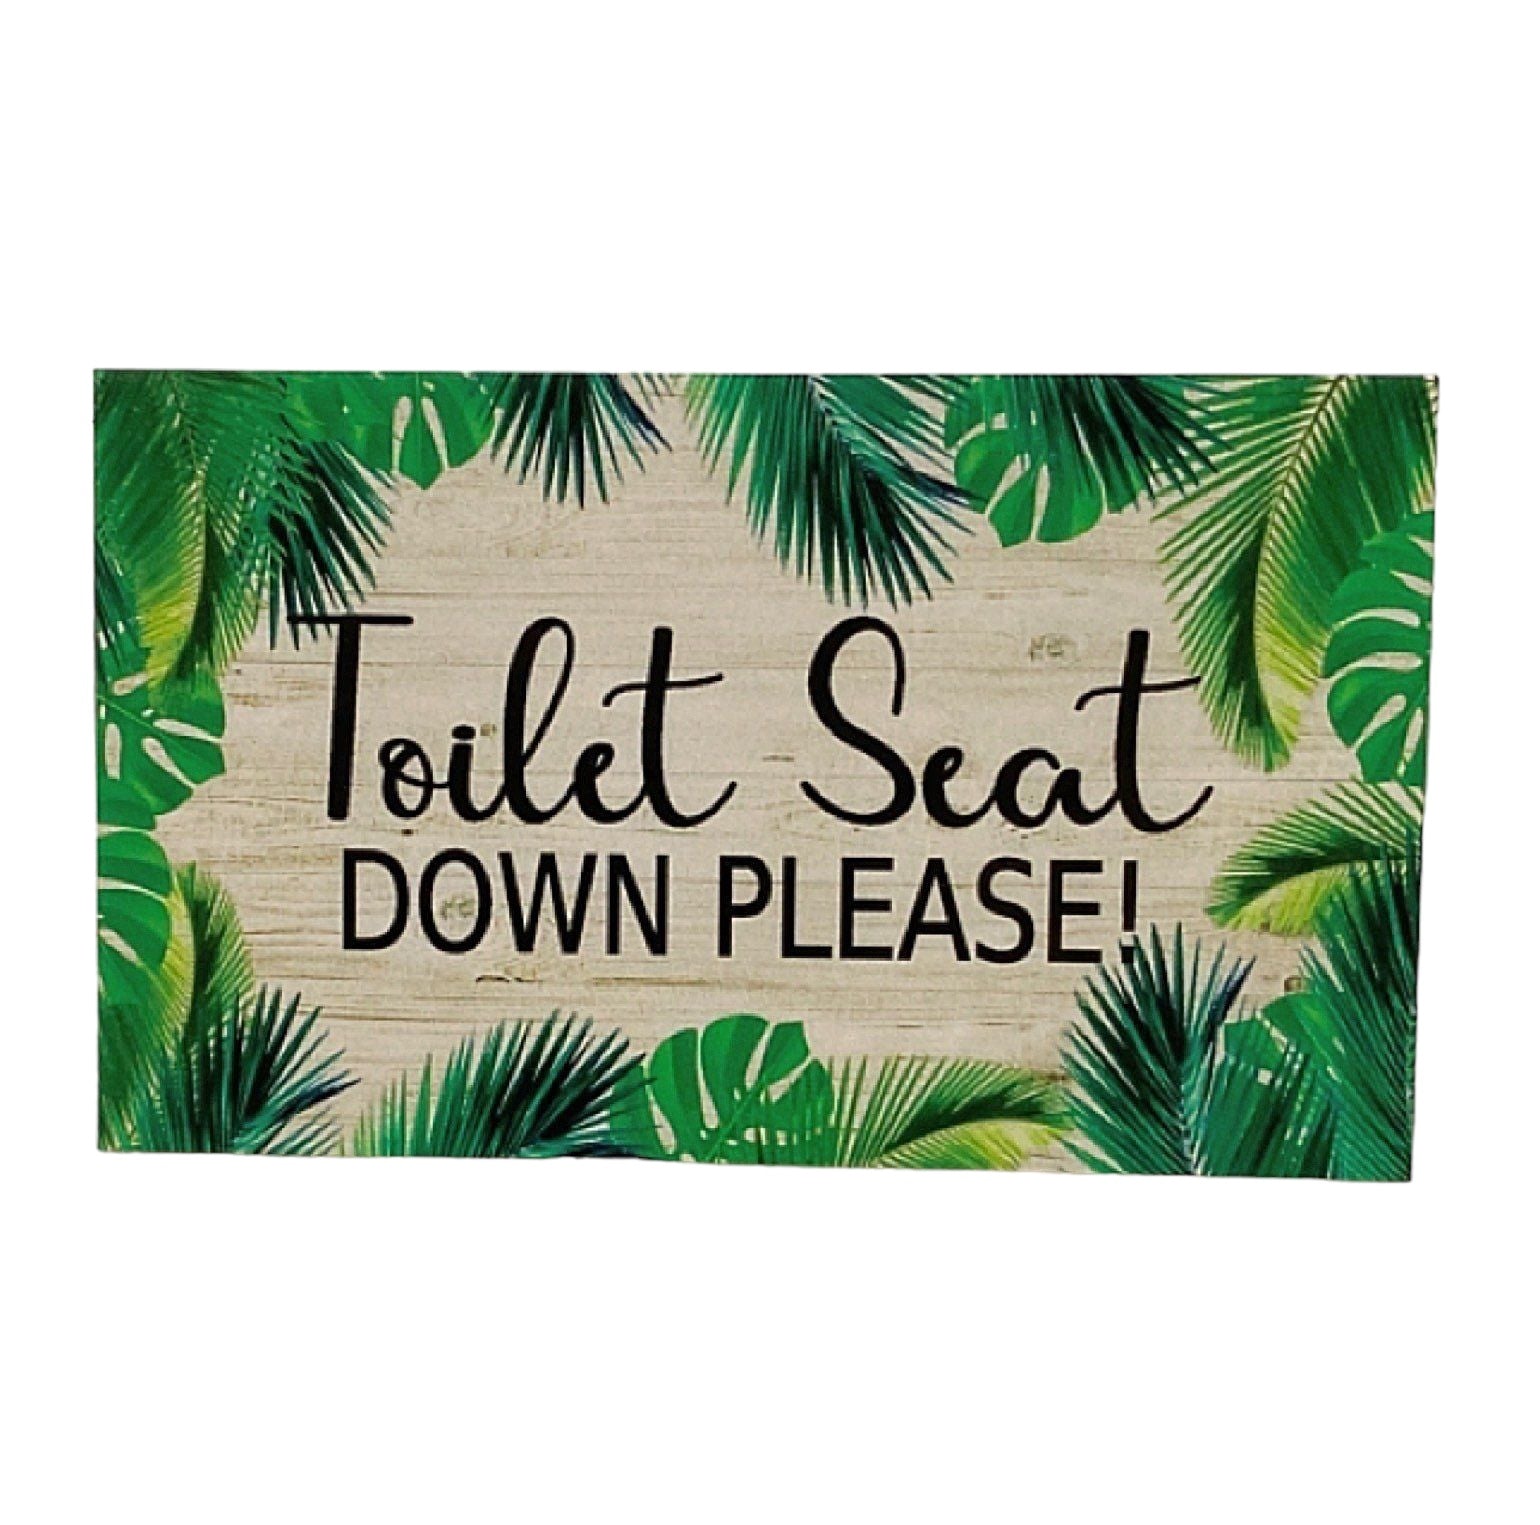 Toilet Seat Down Please Tropical Paradise Sign - The Renmy Store Homewares & Gifts 